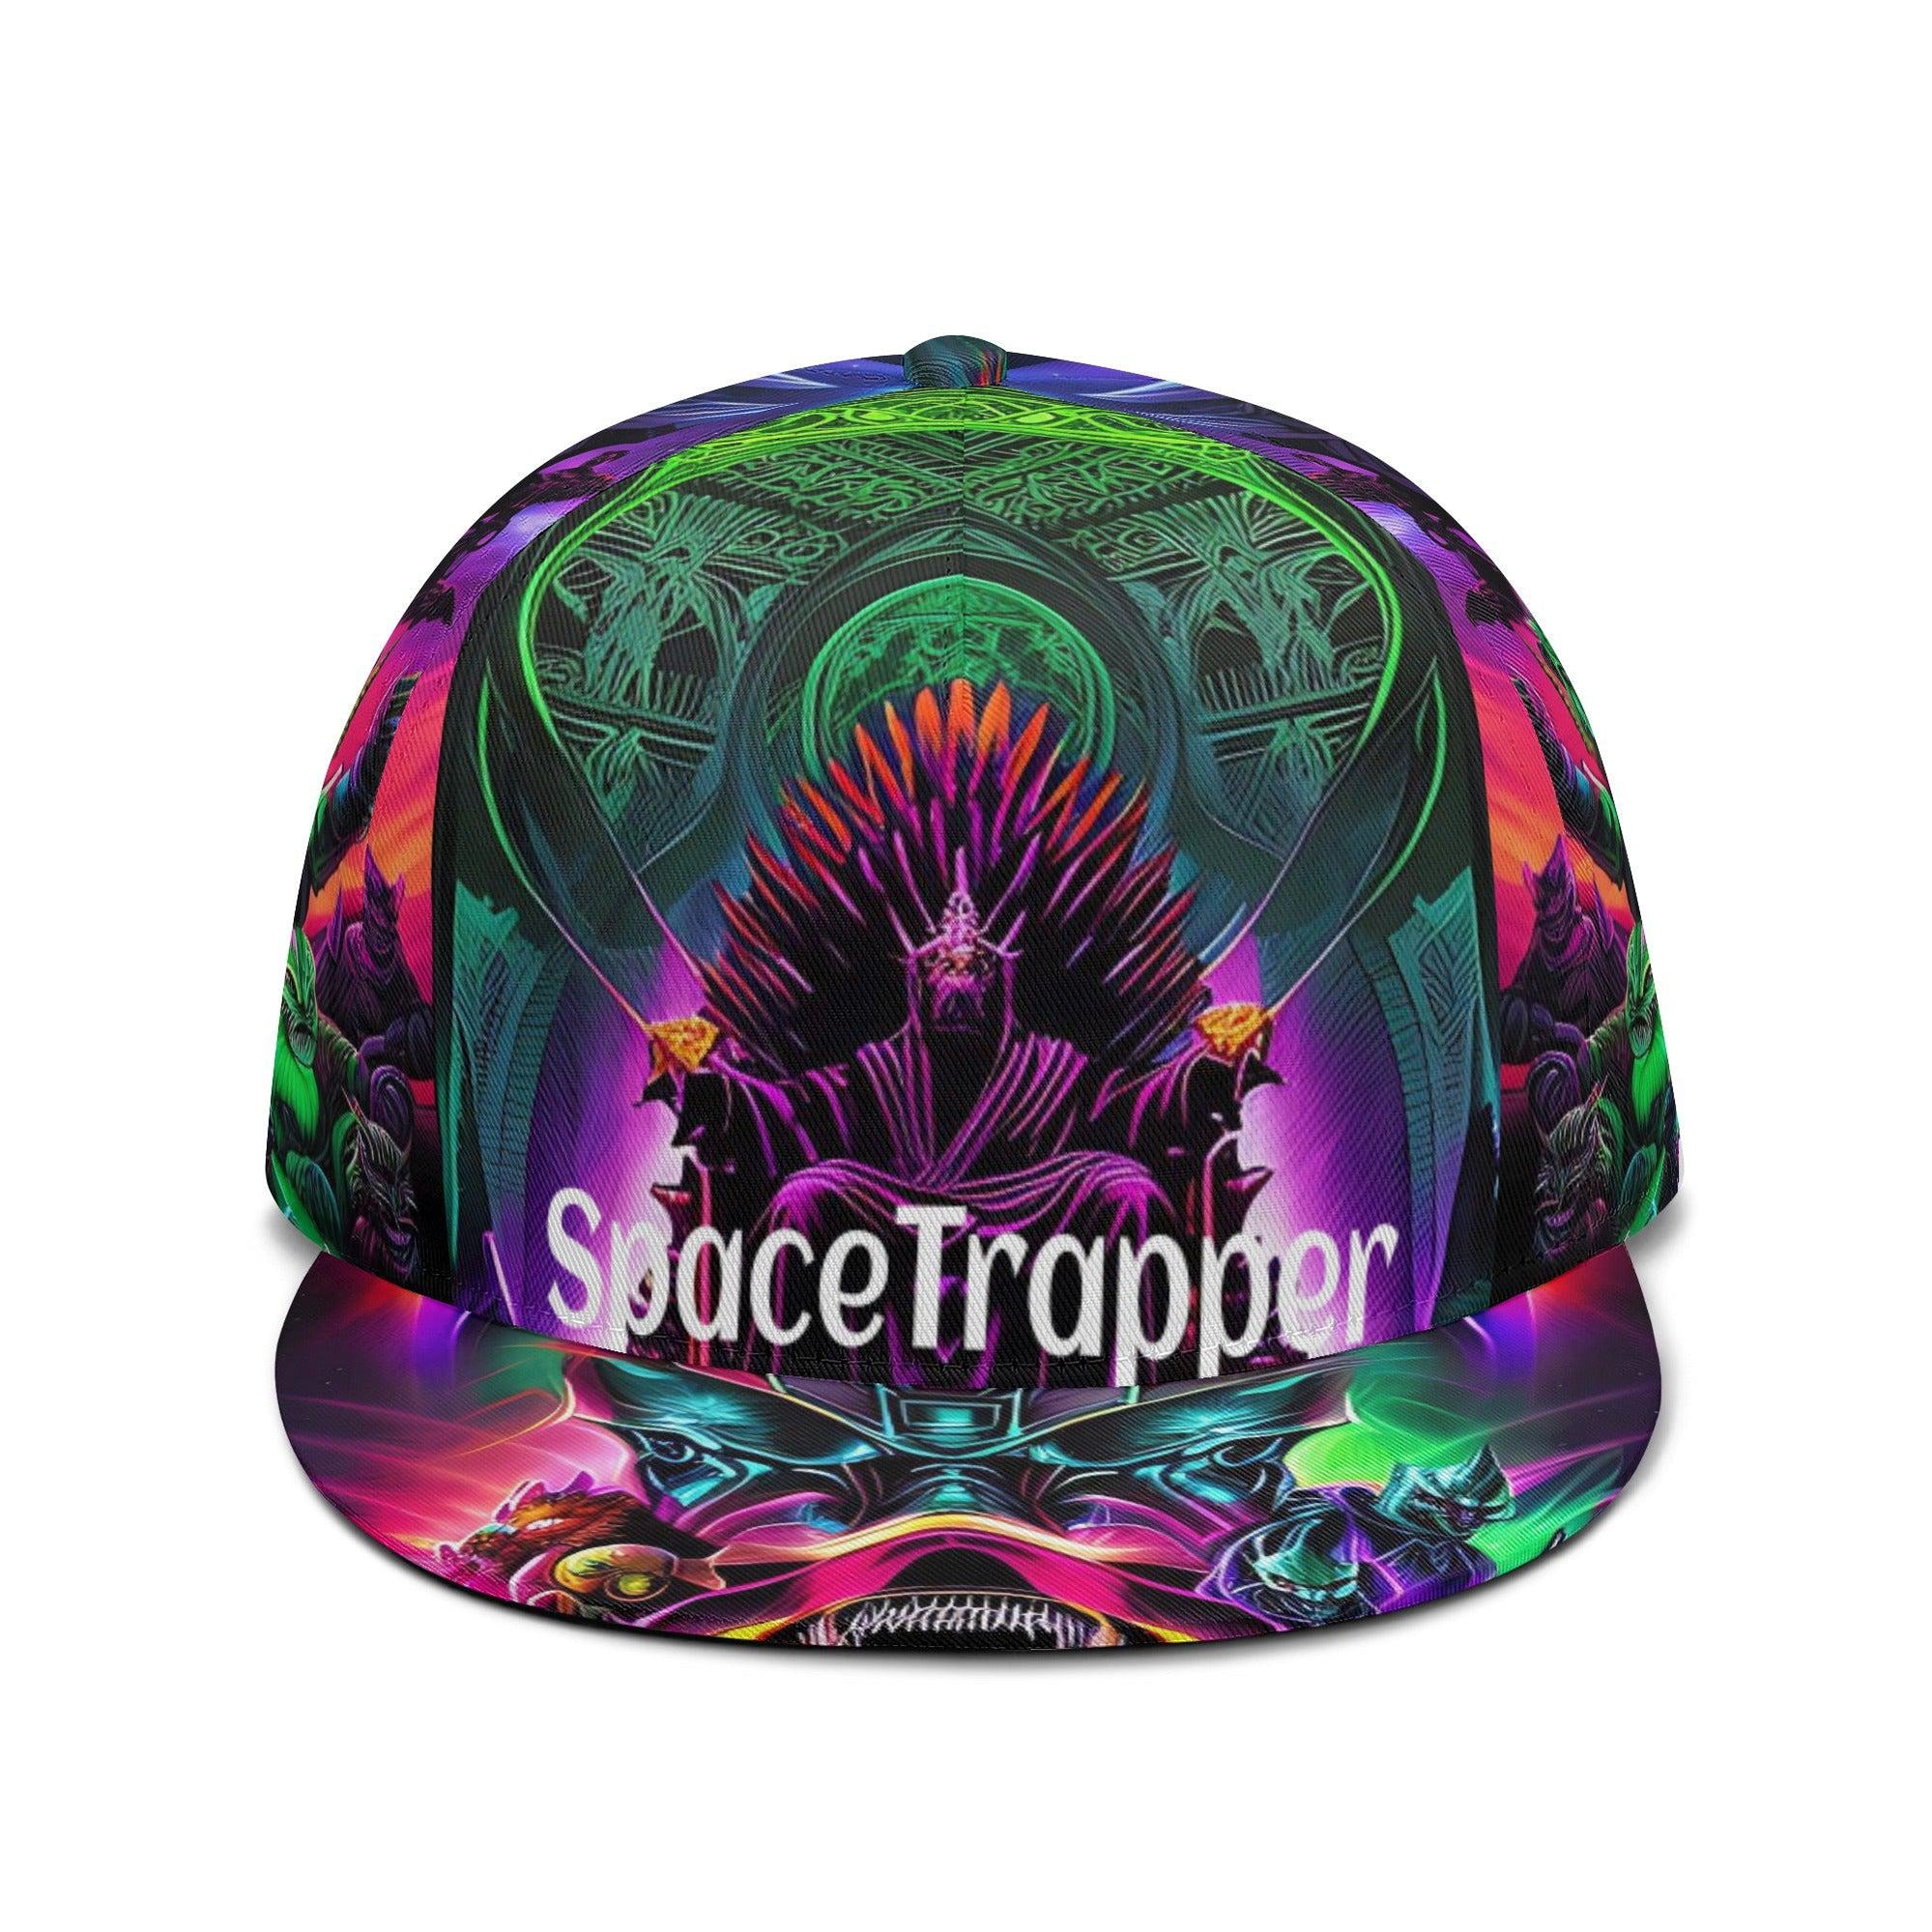 SpaceTrappers Overload kNOwCap - Kanivee Customs